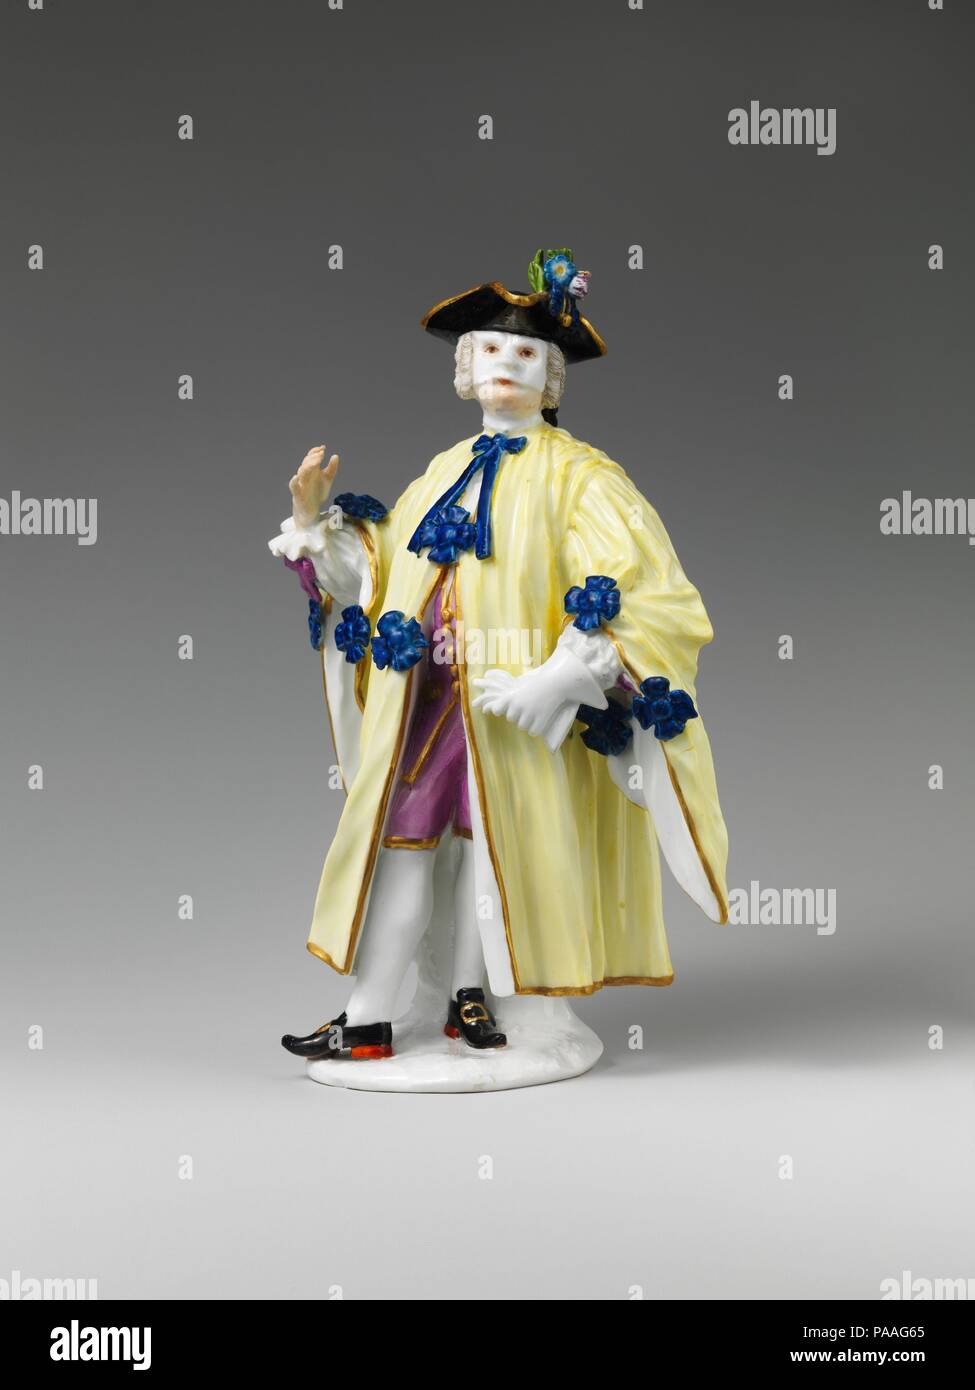 Masquerader (one of a pair). Culture: German, Meissen. Dimensions: Overall (confirmed): 6 1/2 x 4 x 2 3/4 in. (16.5 x 10.2 x 7 cm). Factory: Meissen Manufactory (German, 1710-present). Modeler: Johann Joachim Kändler (German, Fischbach 1706-1775 Meissen). Date: 1745.  This model of a porcelain figure wearing a black tricorne hat, a white half mask, and a long robe trimmed with bows is commonly identified as the Avvocato, or lawyer, one of the secondary cast of characters comprising the Comédie Italienne. However, it has been pointed out recently that neither the costume nor the pose of this fi Stock Photo